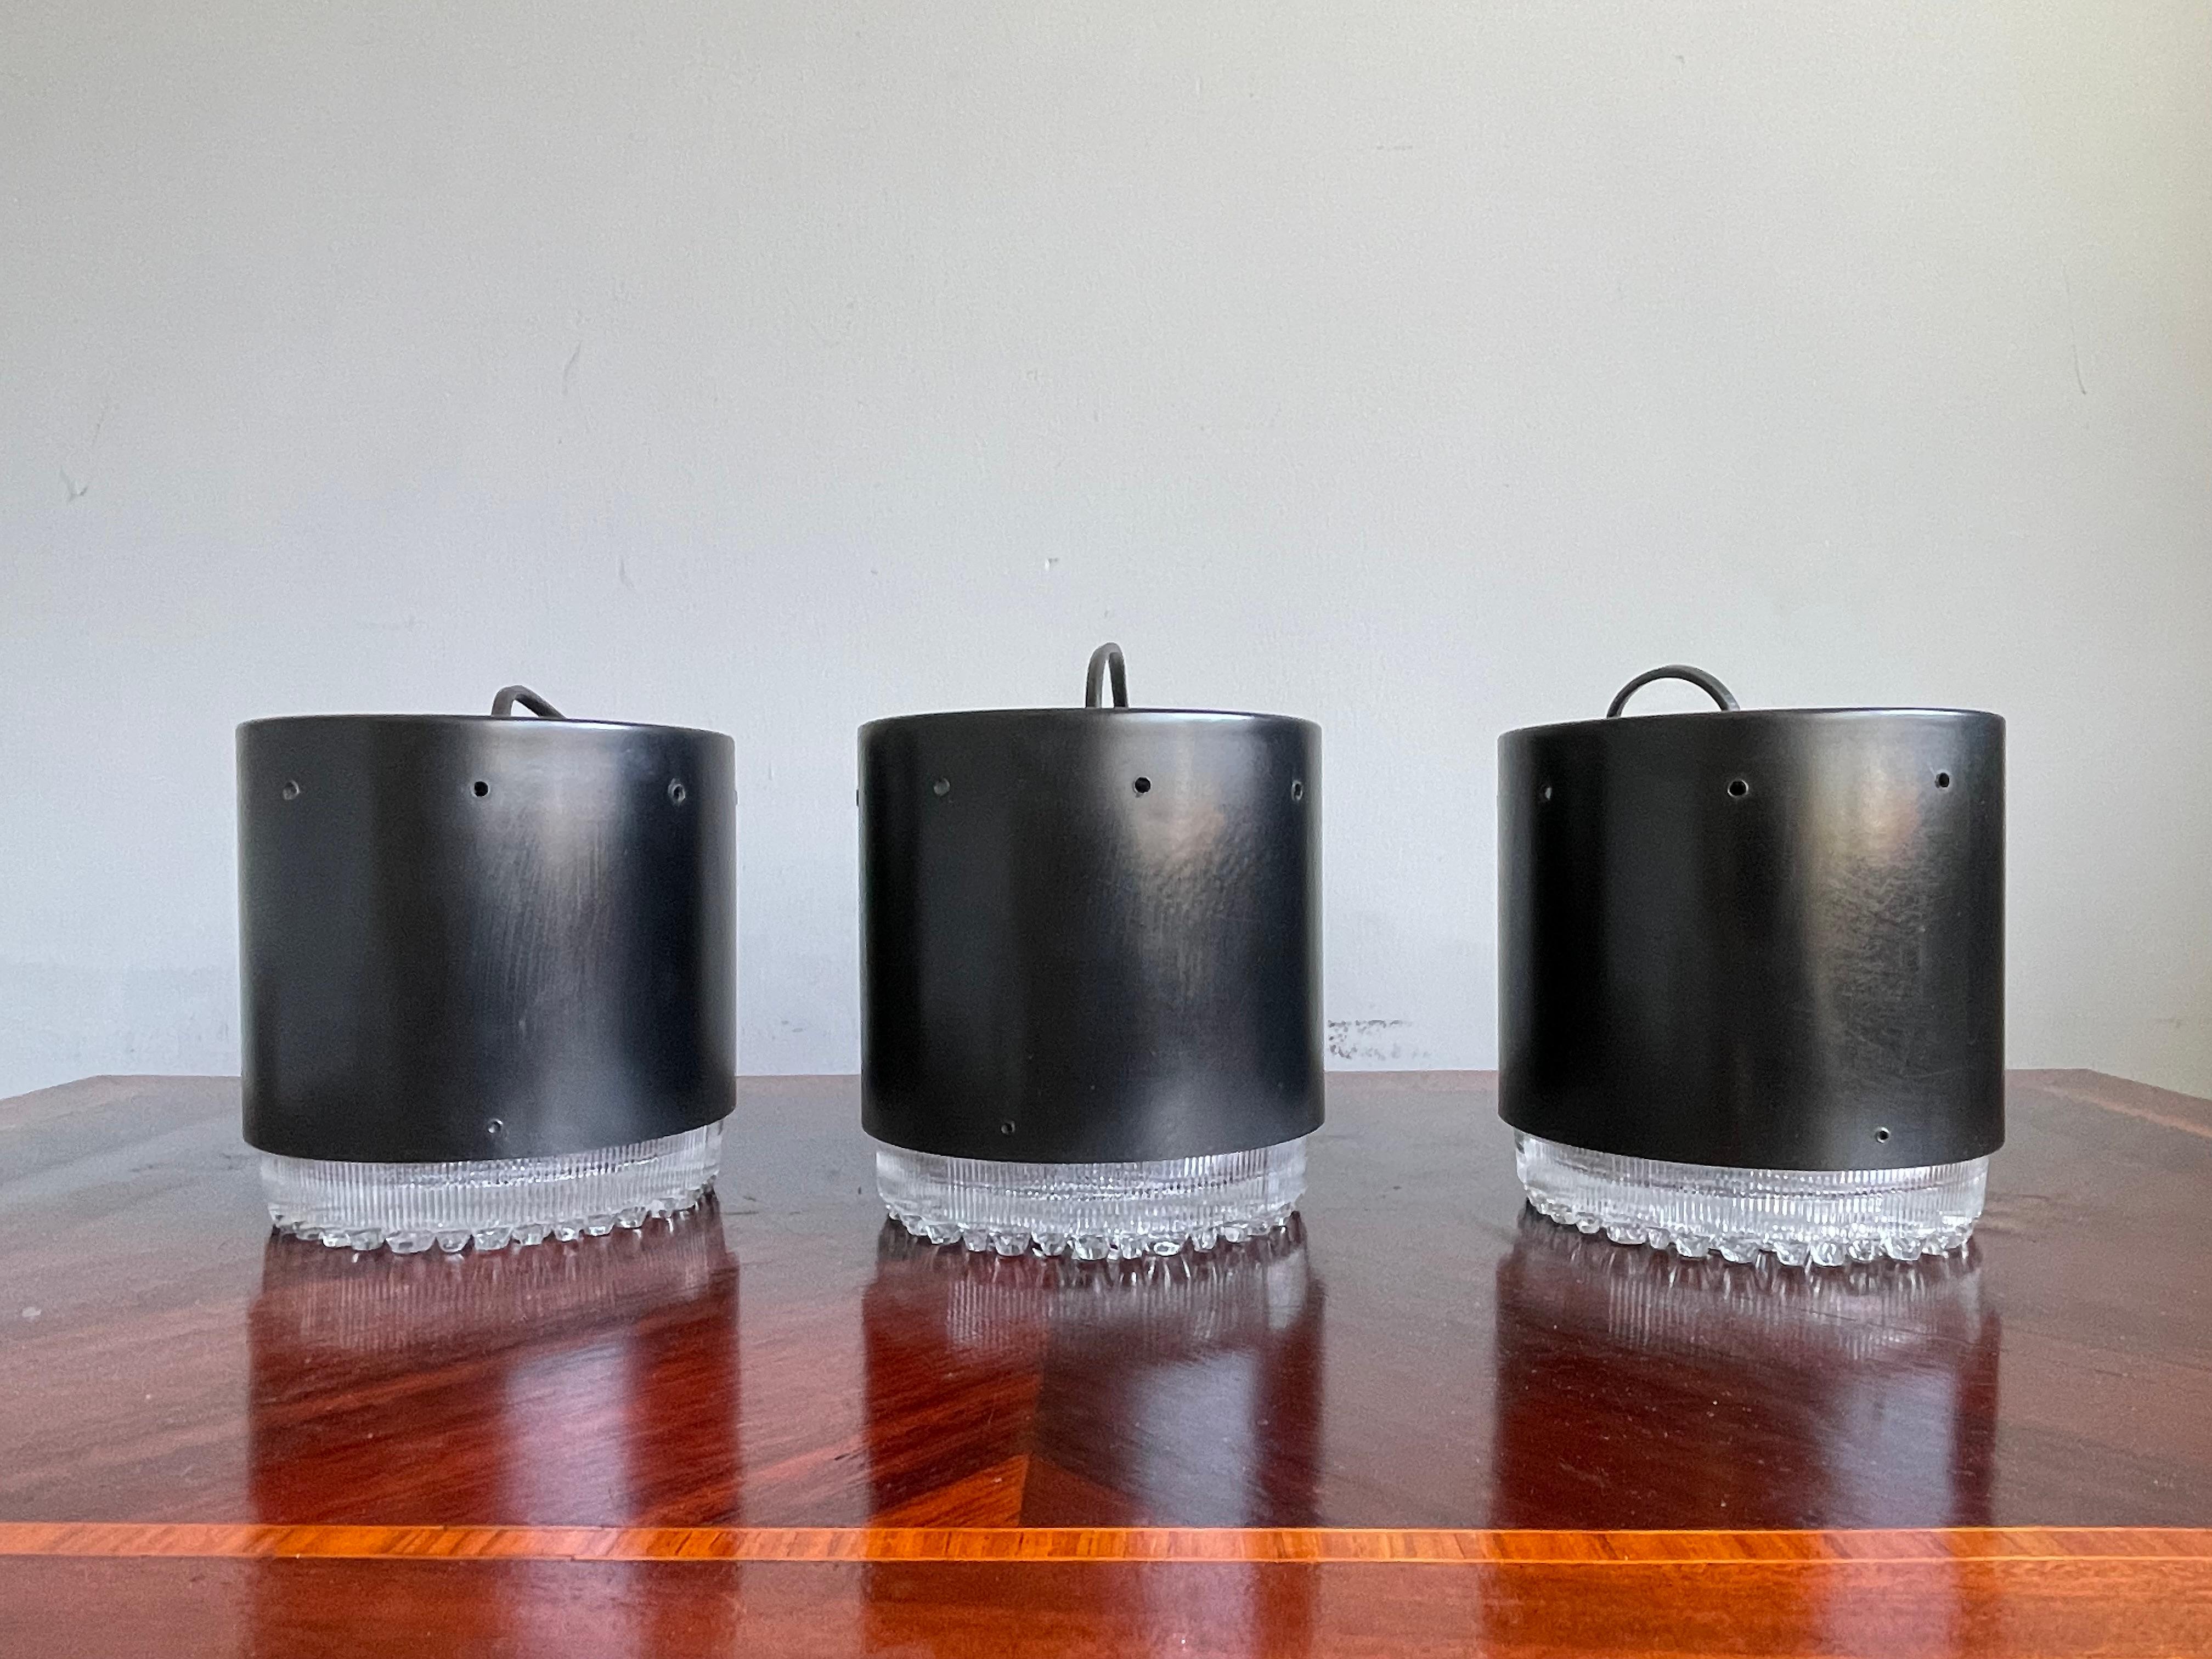 Set of 3 Very Rare Midcentury Modern Flush Mounts by RAAK Amsterdam 1960s For Sale 11